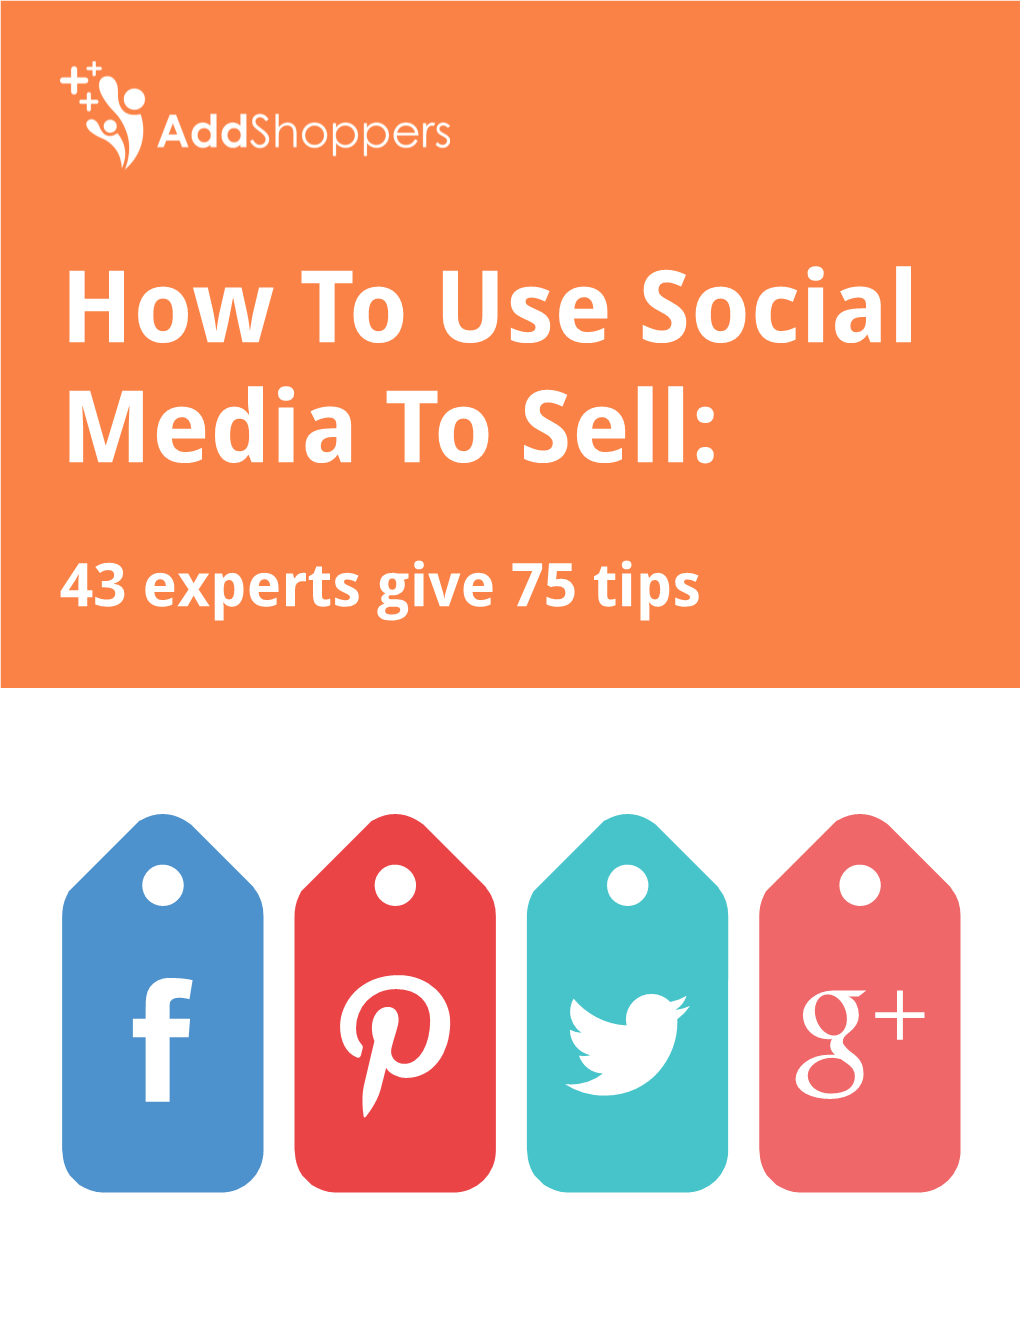 How to Use Social Media to Sell